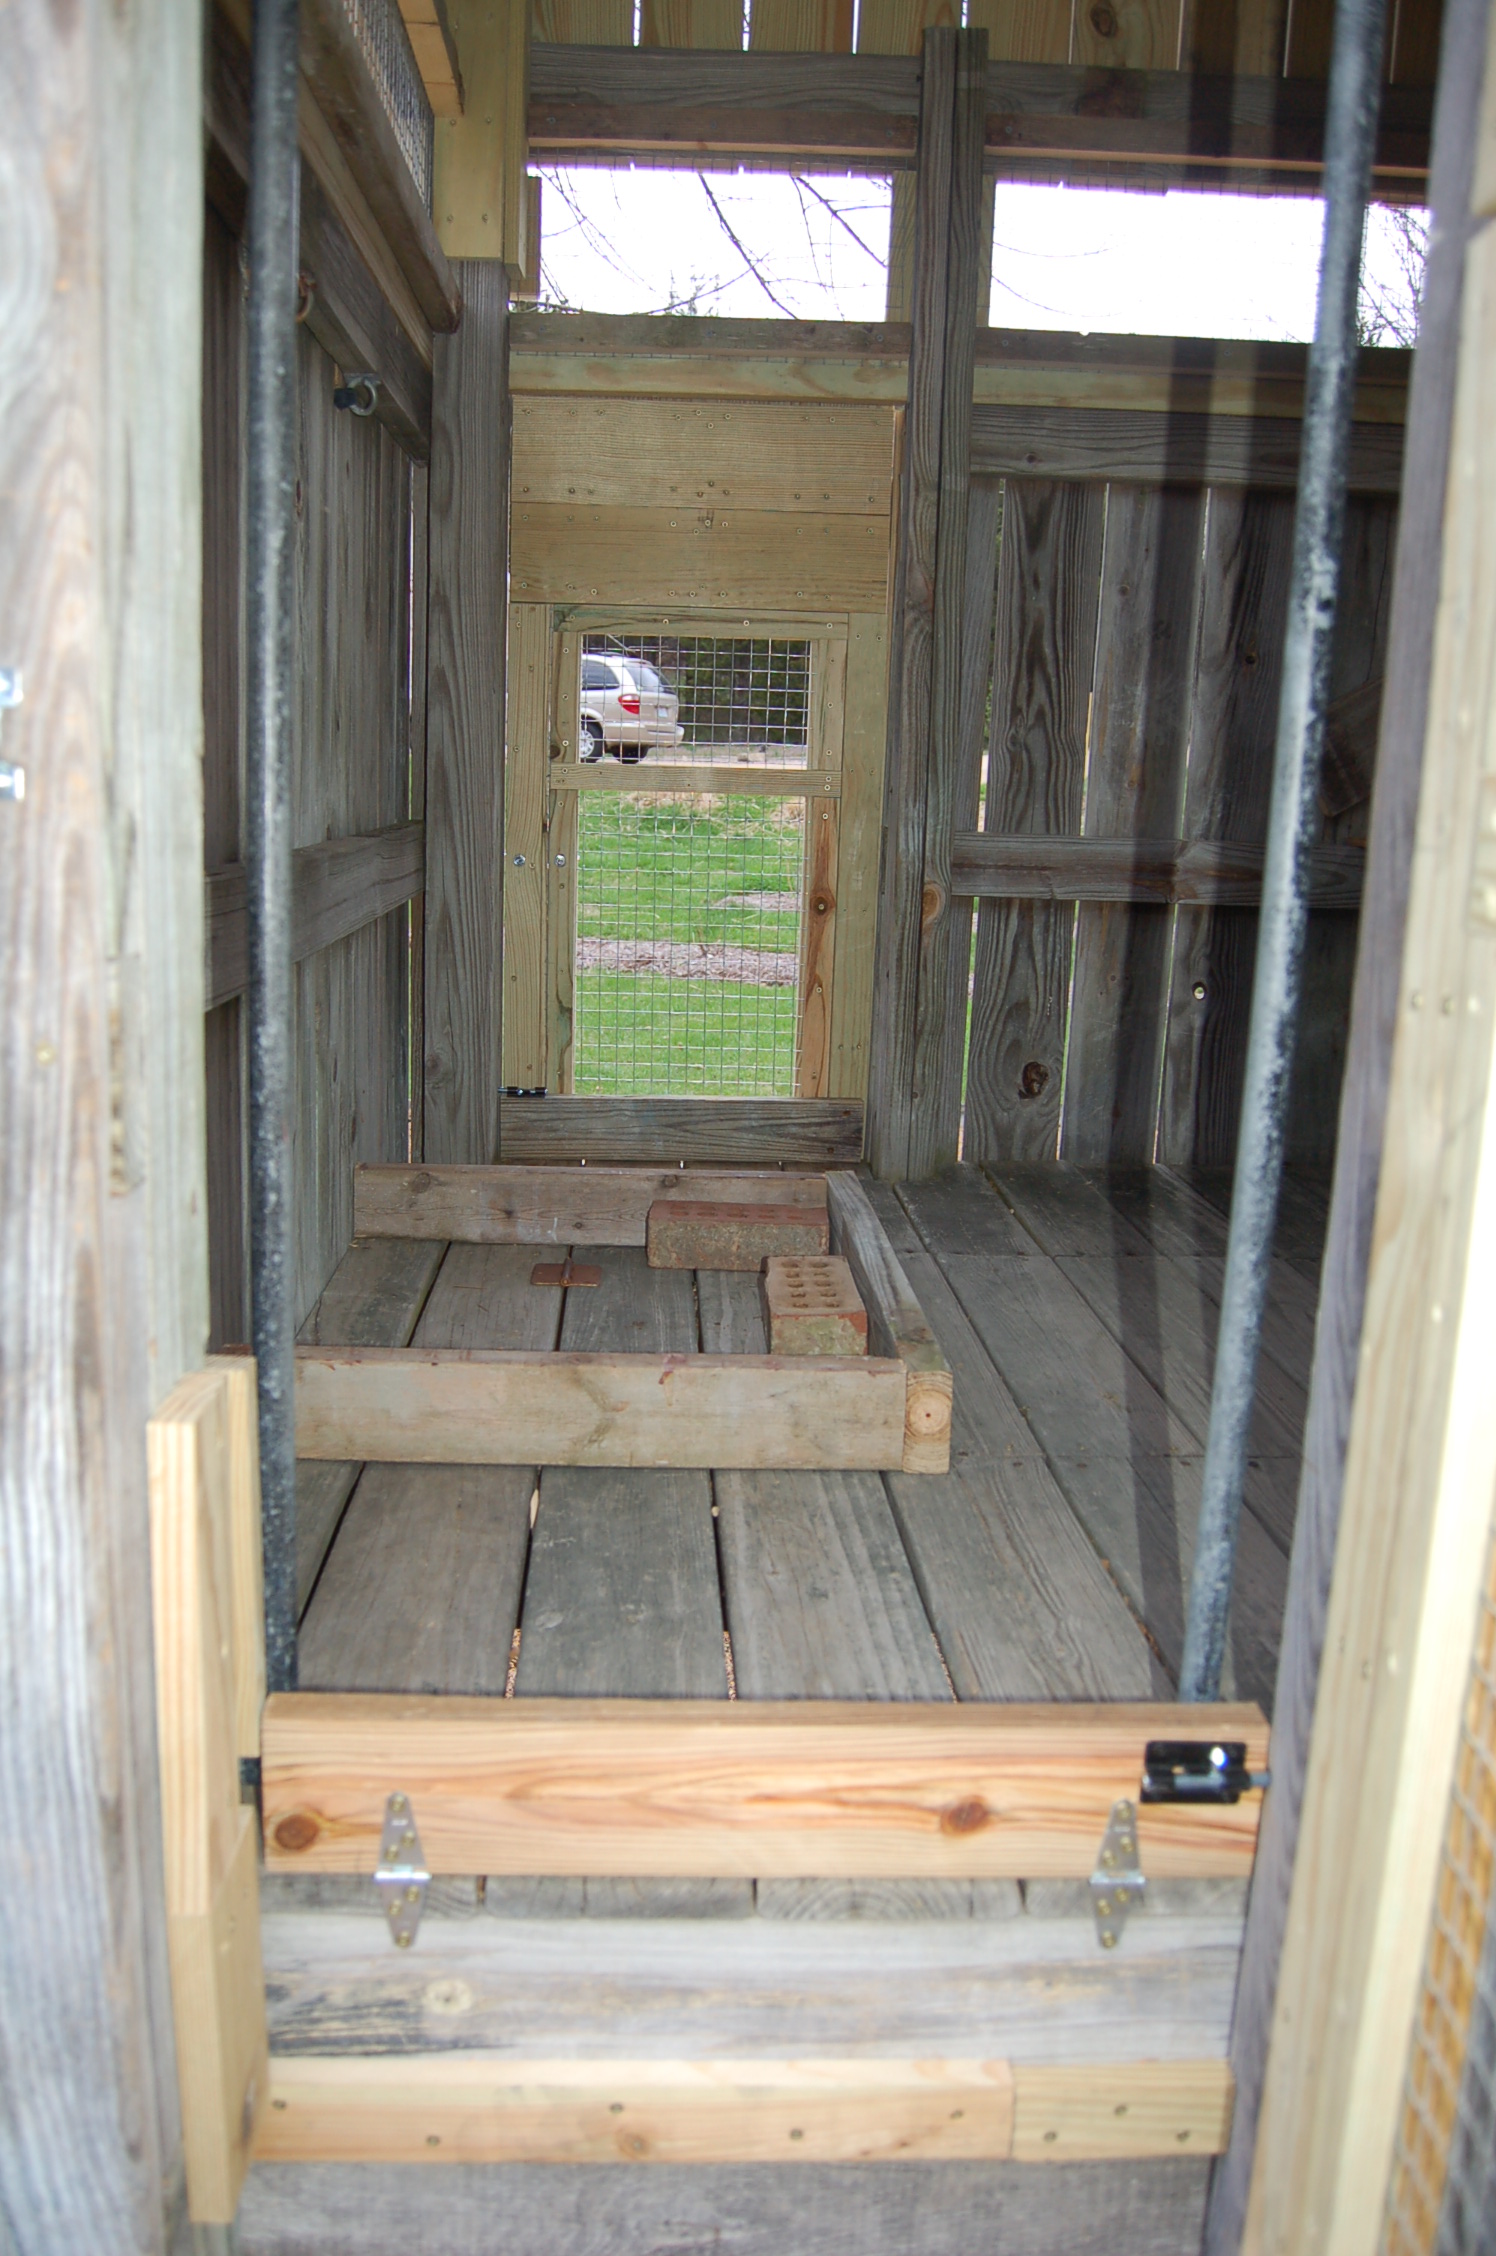 Originally we had the hole in the floor for the ramp here (edged by the 2x4's to hold back the bedding).  We ended up moving the hole and now the feeder is hanging above this location.  We put the hole under the poop board - works out perfectly!